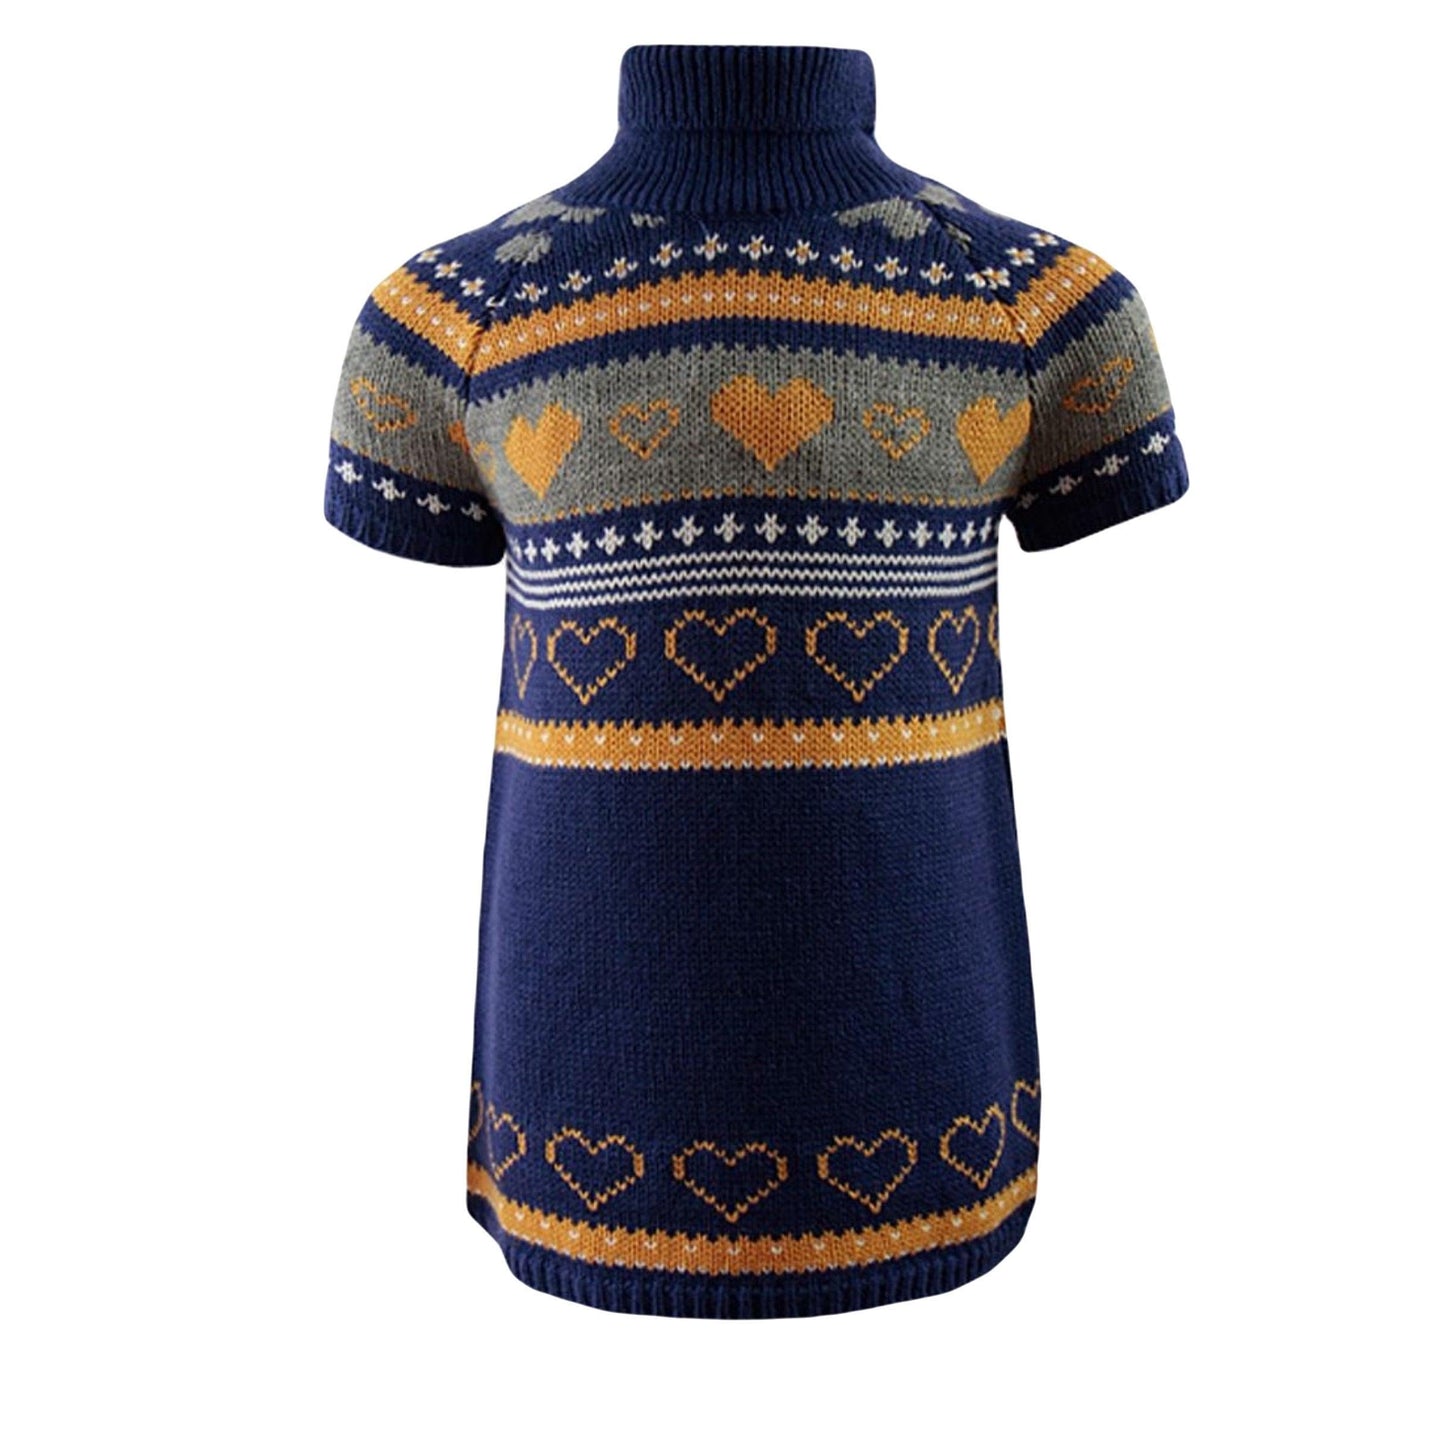 Girls Heart Knitted Dress | Oscar & Me | Baby & Children’s Clothing & Accessories